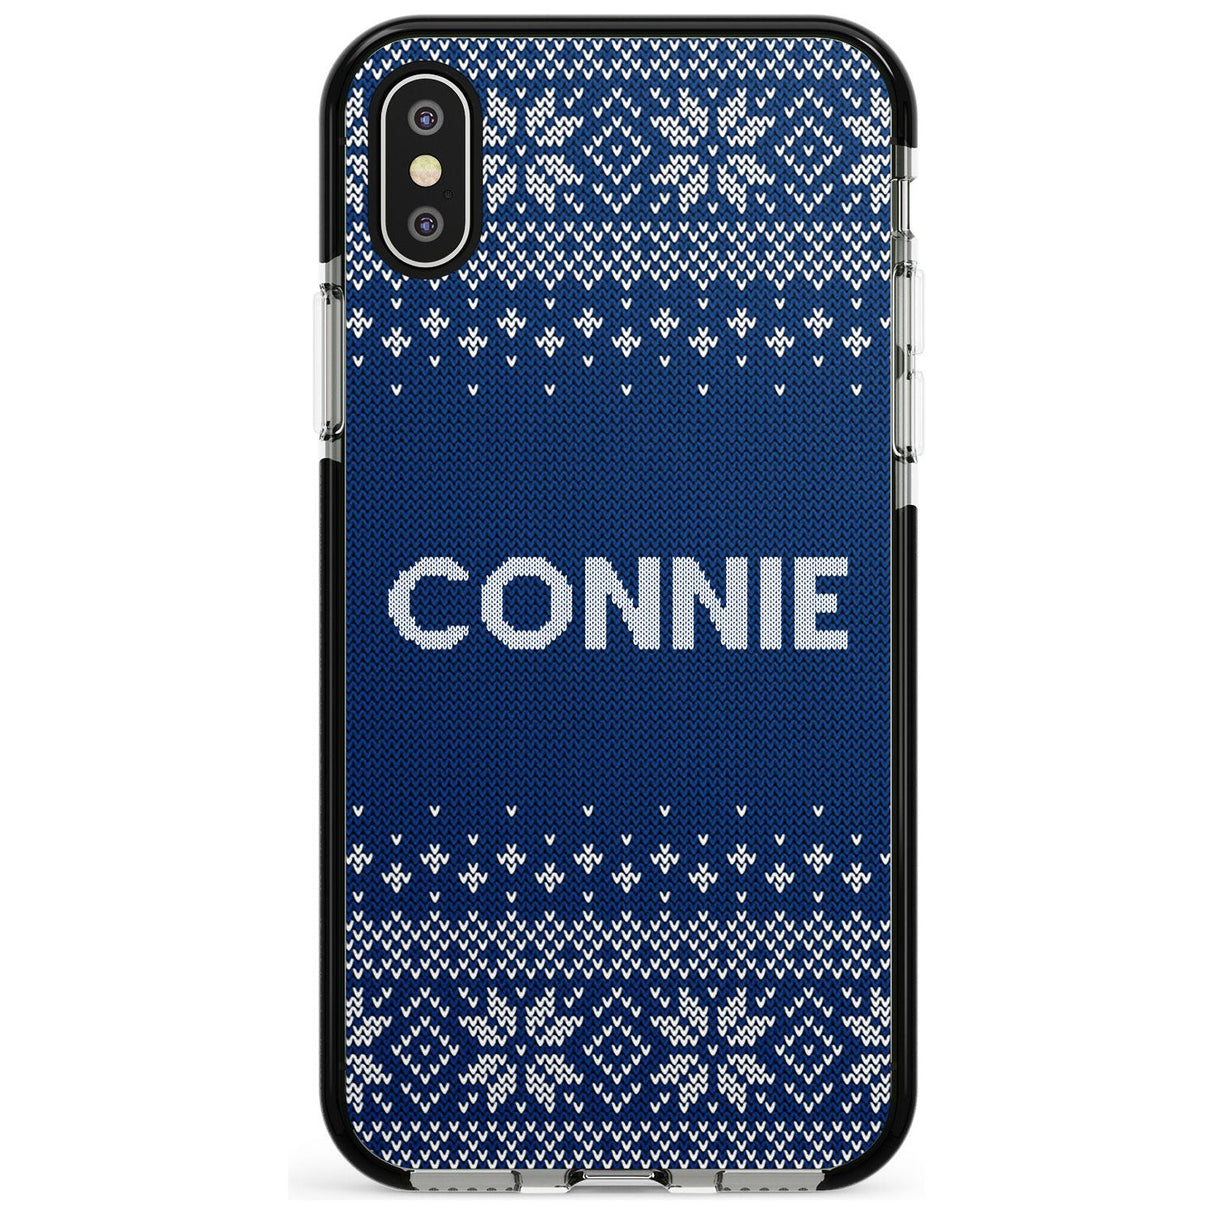 Personalised Blue Christmas Knitted Jumper Black Impact Phone Case for iPhone X XS Max XR